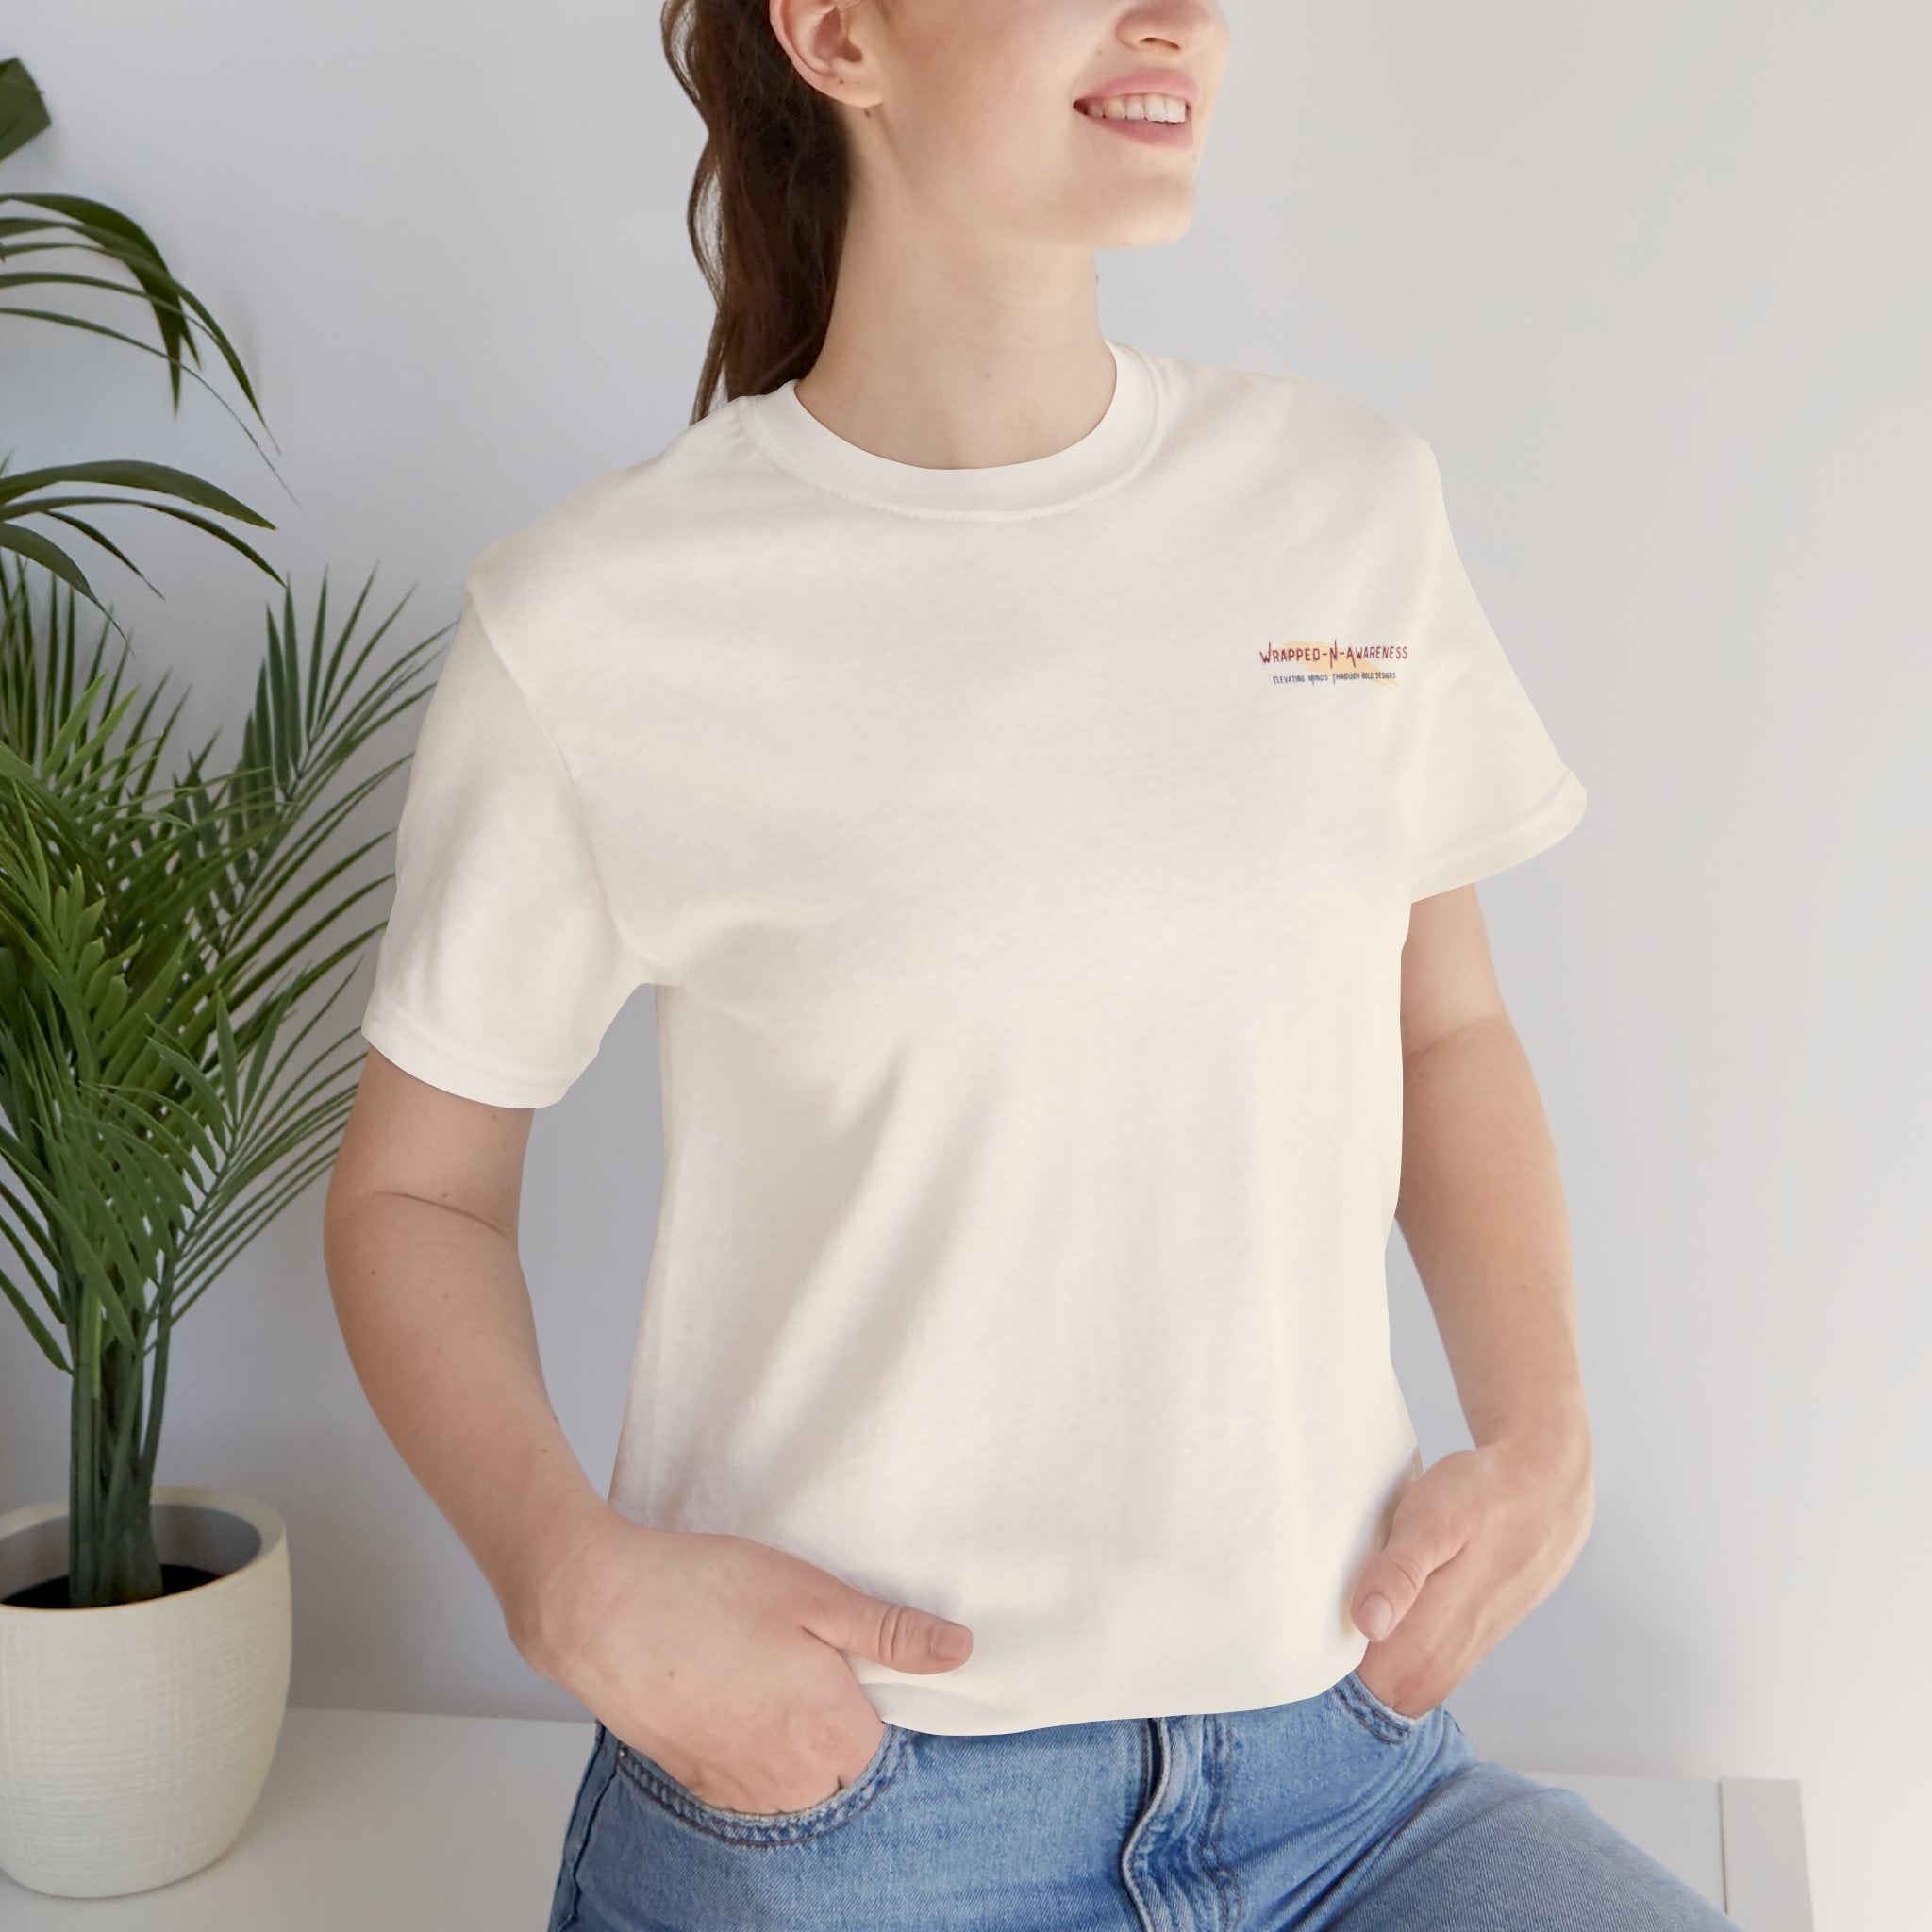 You Are Enough Short Sleeve Tee Bella+Canvas 3001 Heather Mauve Airlume Cotton Bella+Canvas 3001 Crew Neckline Jersey Short Sleeve Lightweight Fabric Mental Health Support Retail Fit Tear-away Label Tee Unisex Tee T-Shirt 14996922546181001247_2048 Printify